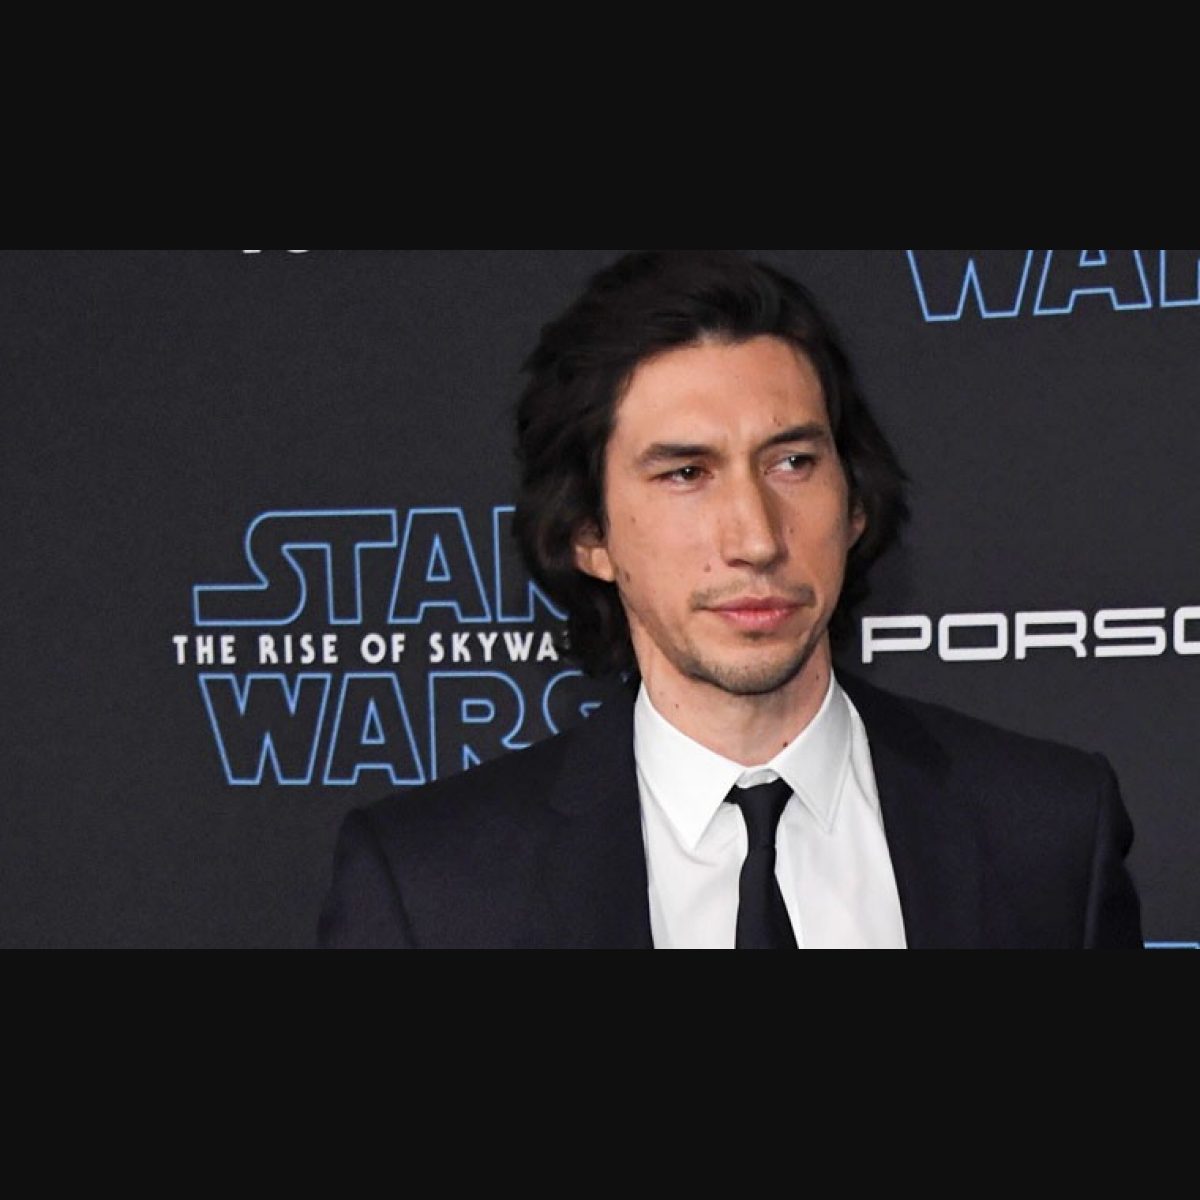 Adam Driver's response to critic goes viral on social media - The Week